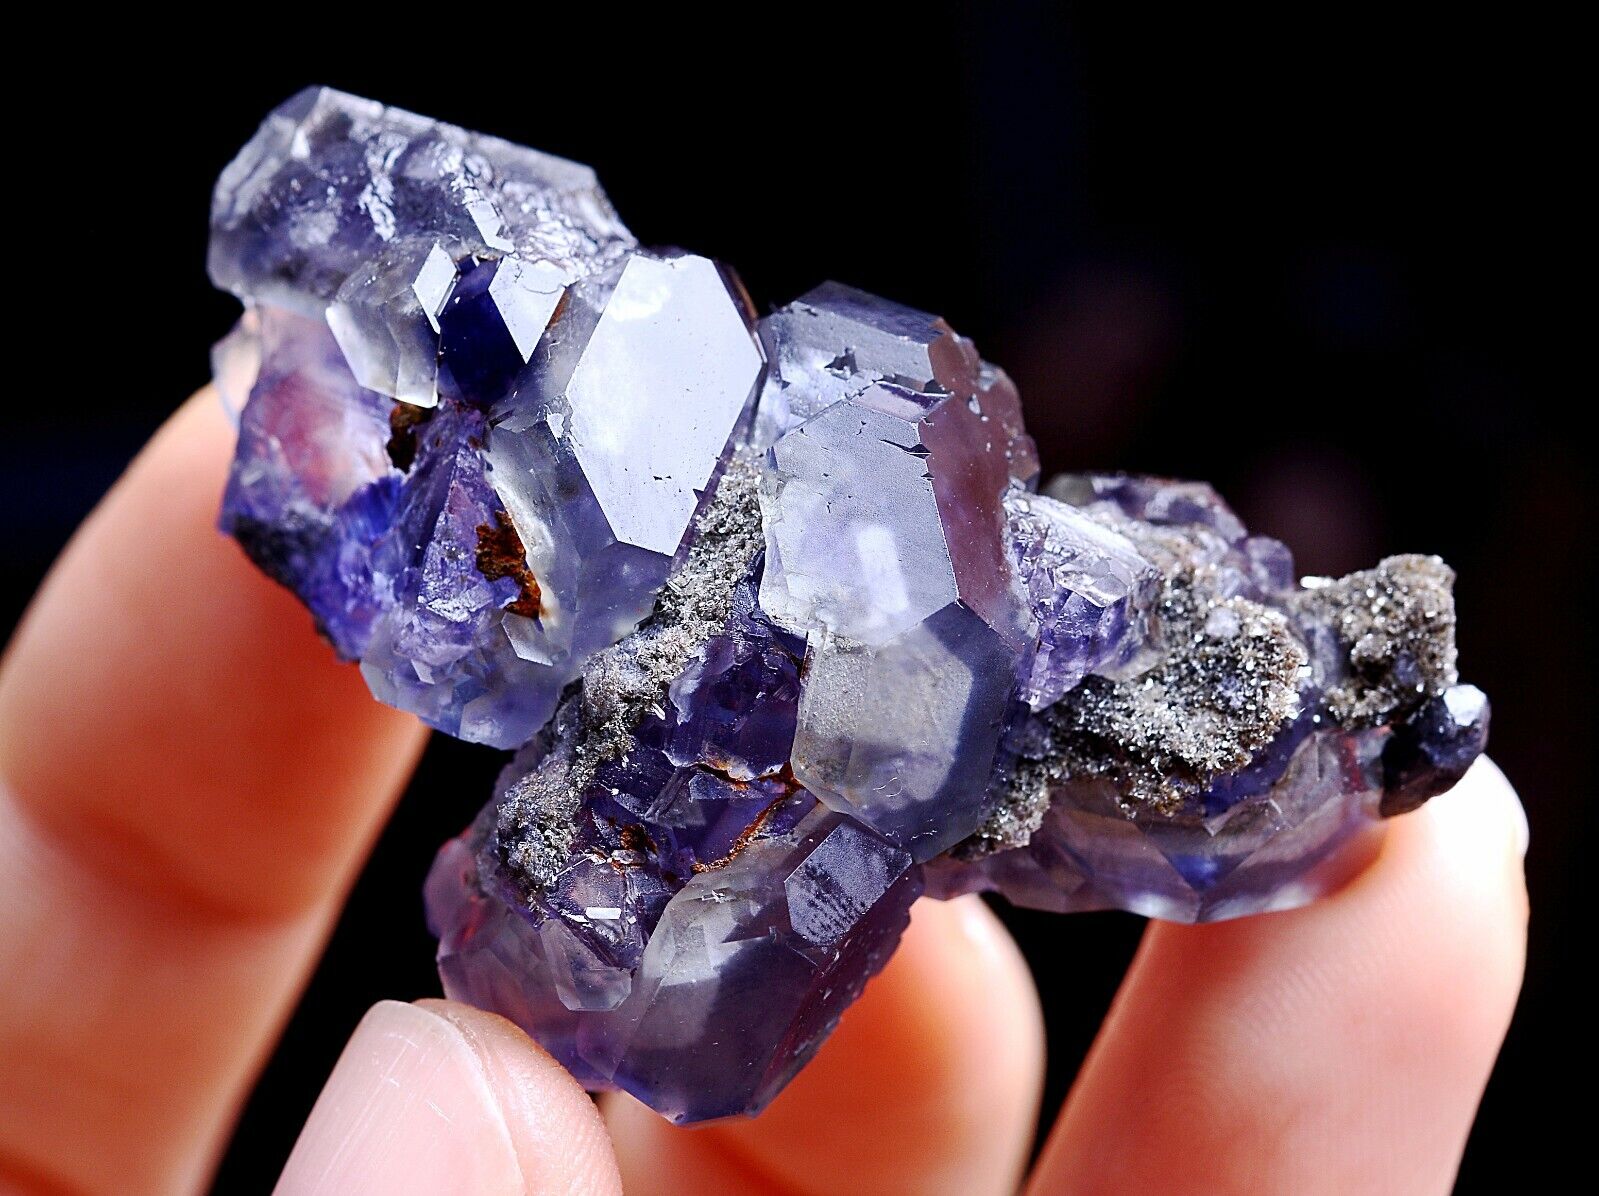 35.g COLLECTION NEWLY DISCOVERED RARE CUBE PURPLE FLUORITE MINERAL SAMPLES